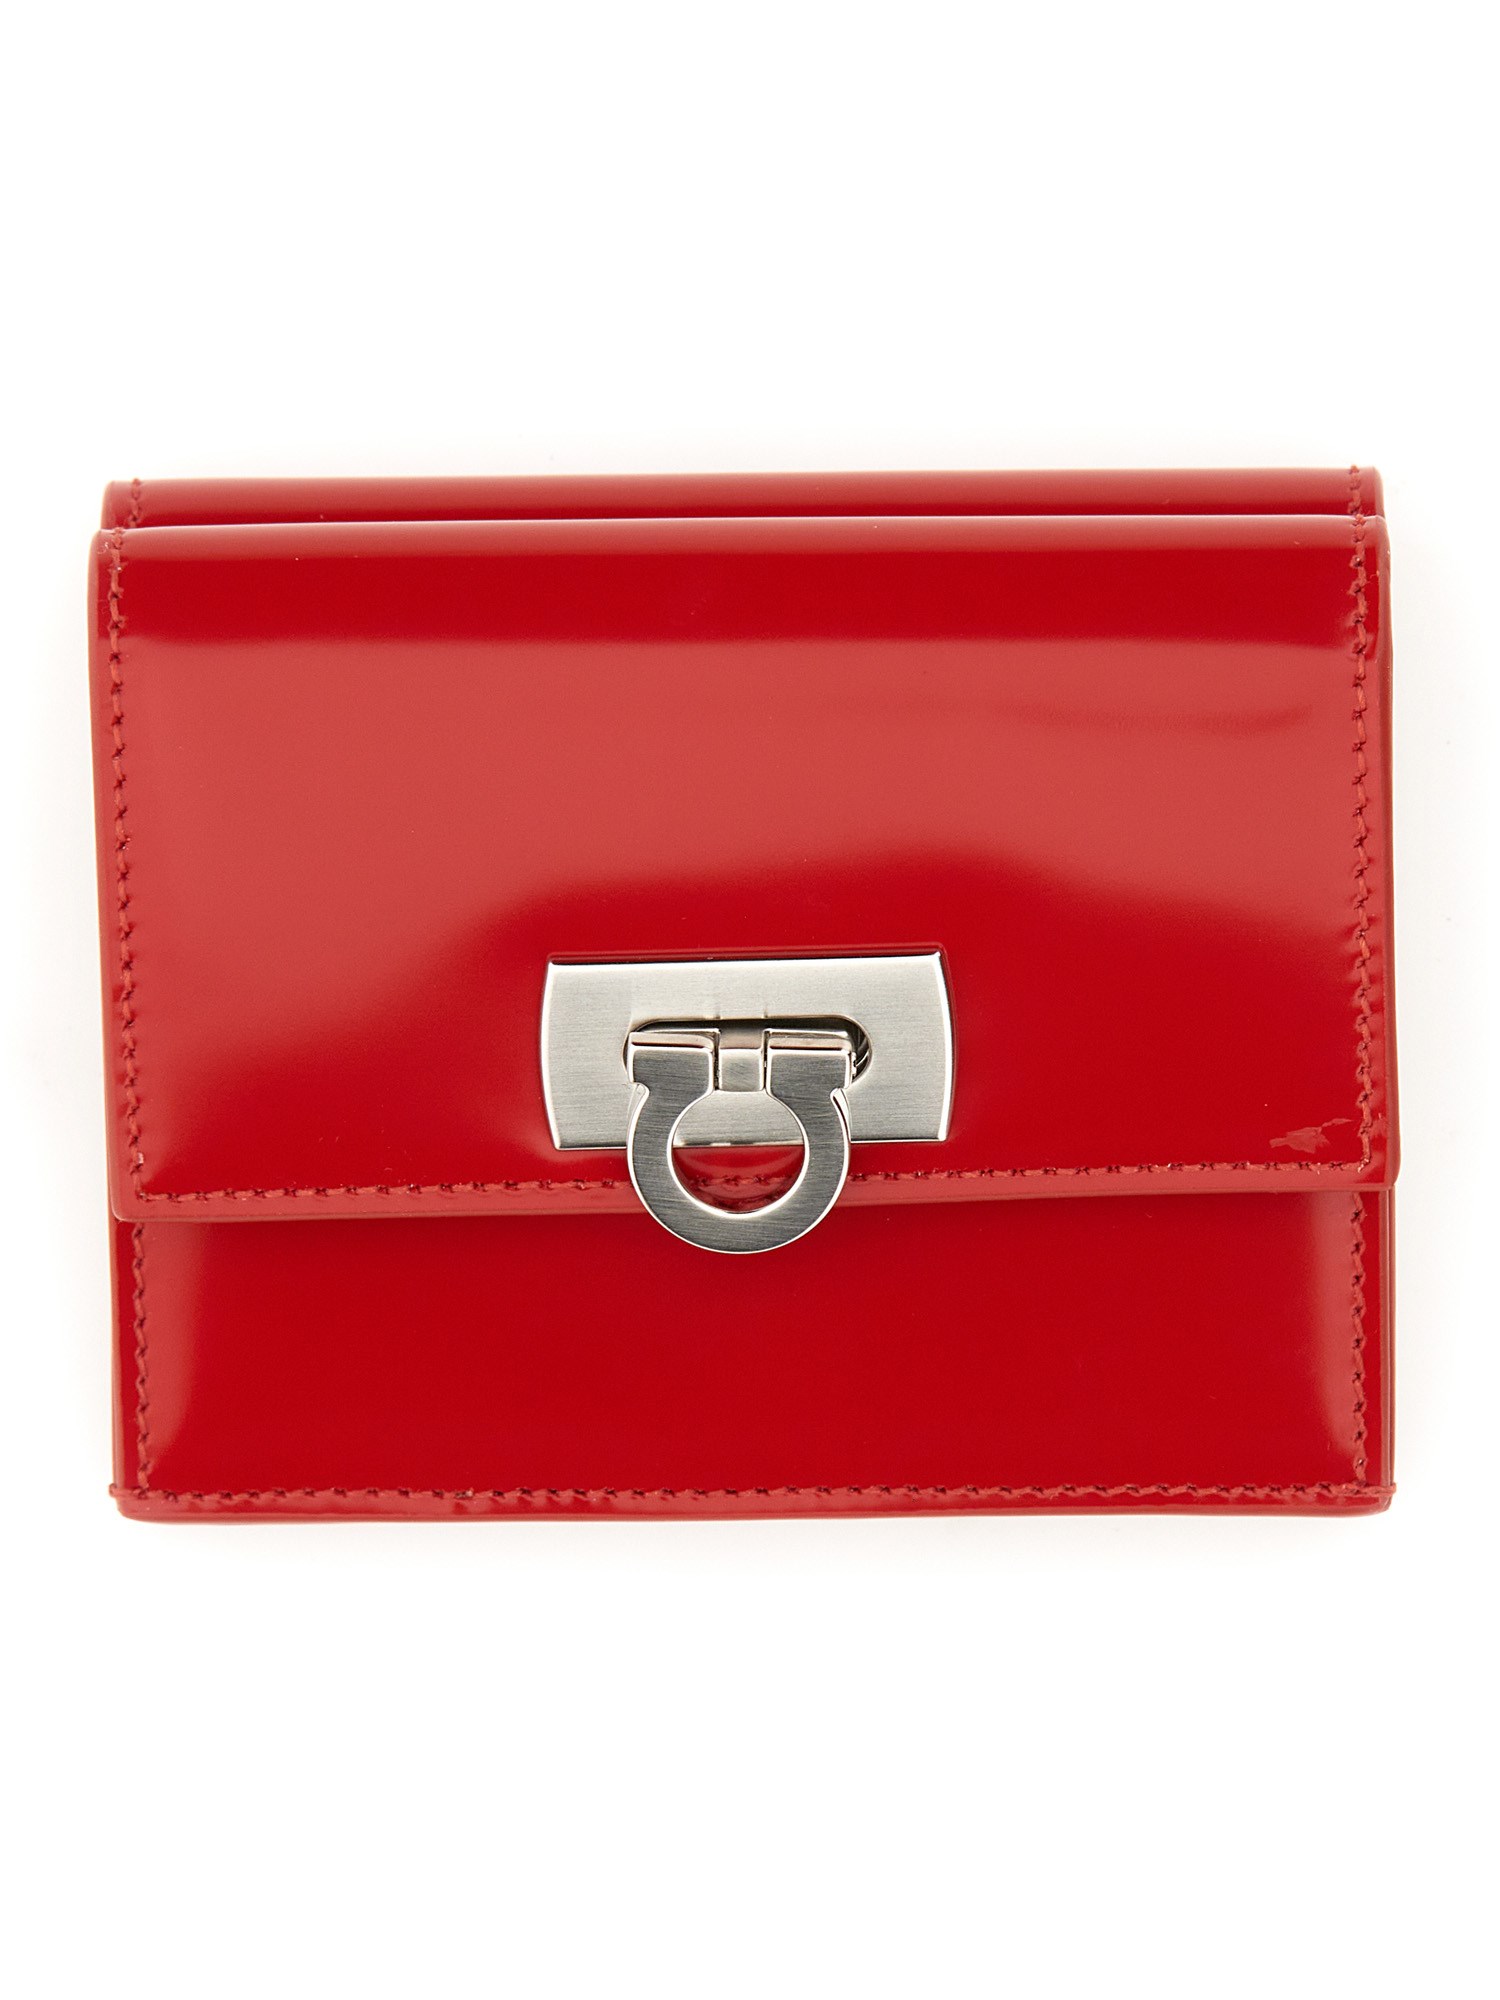 ferragamo compact wallet with hook-and-eye closure